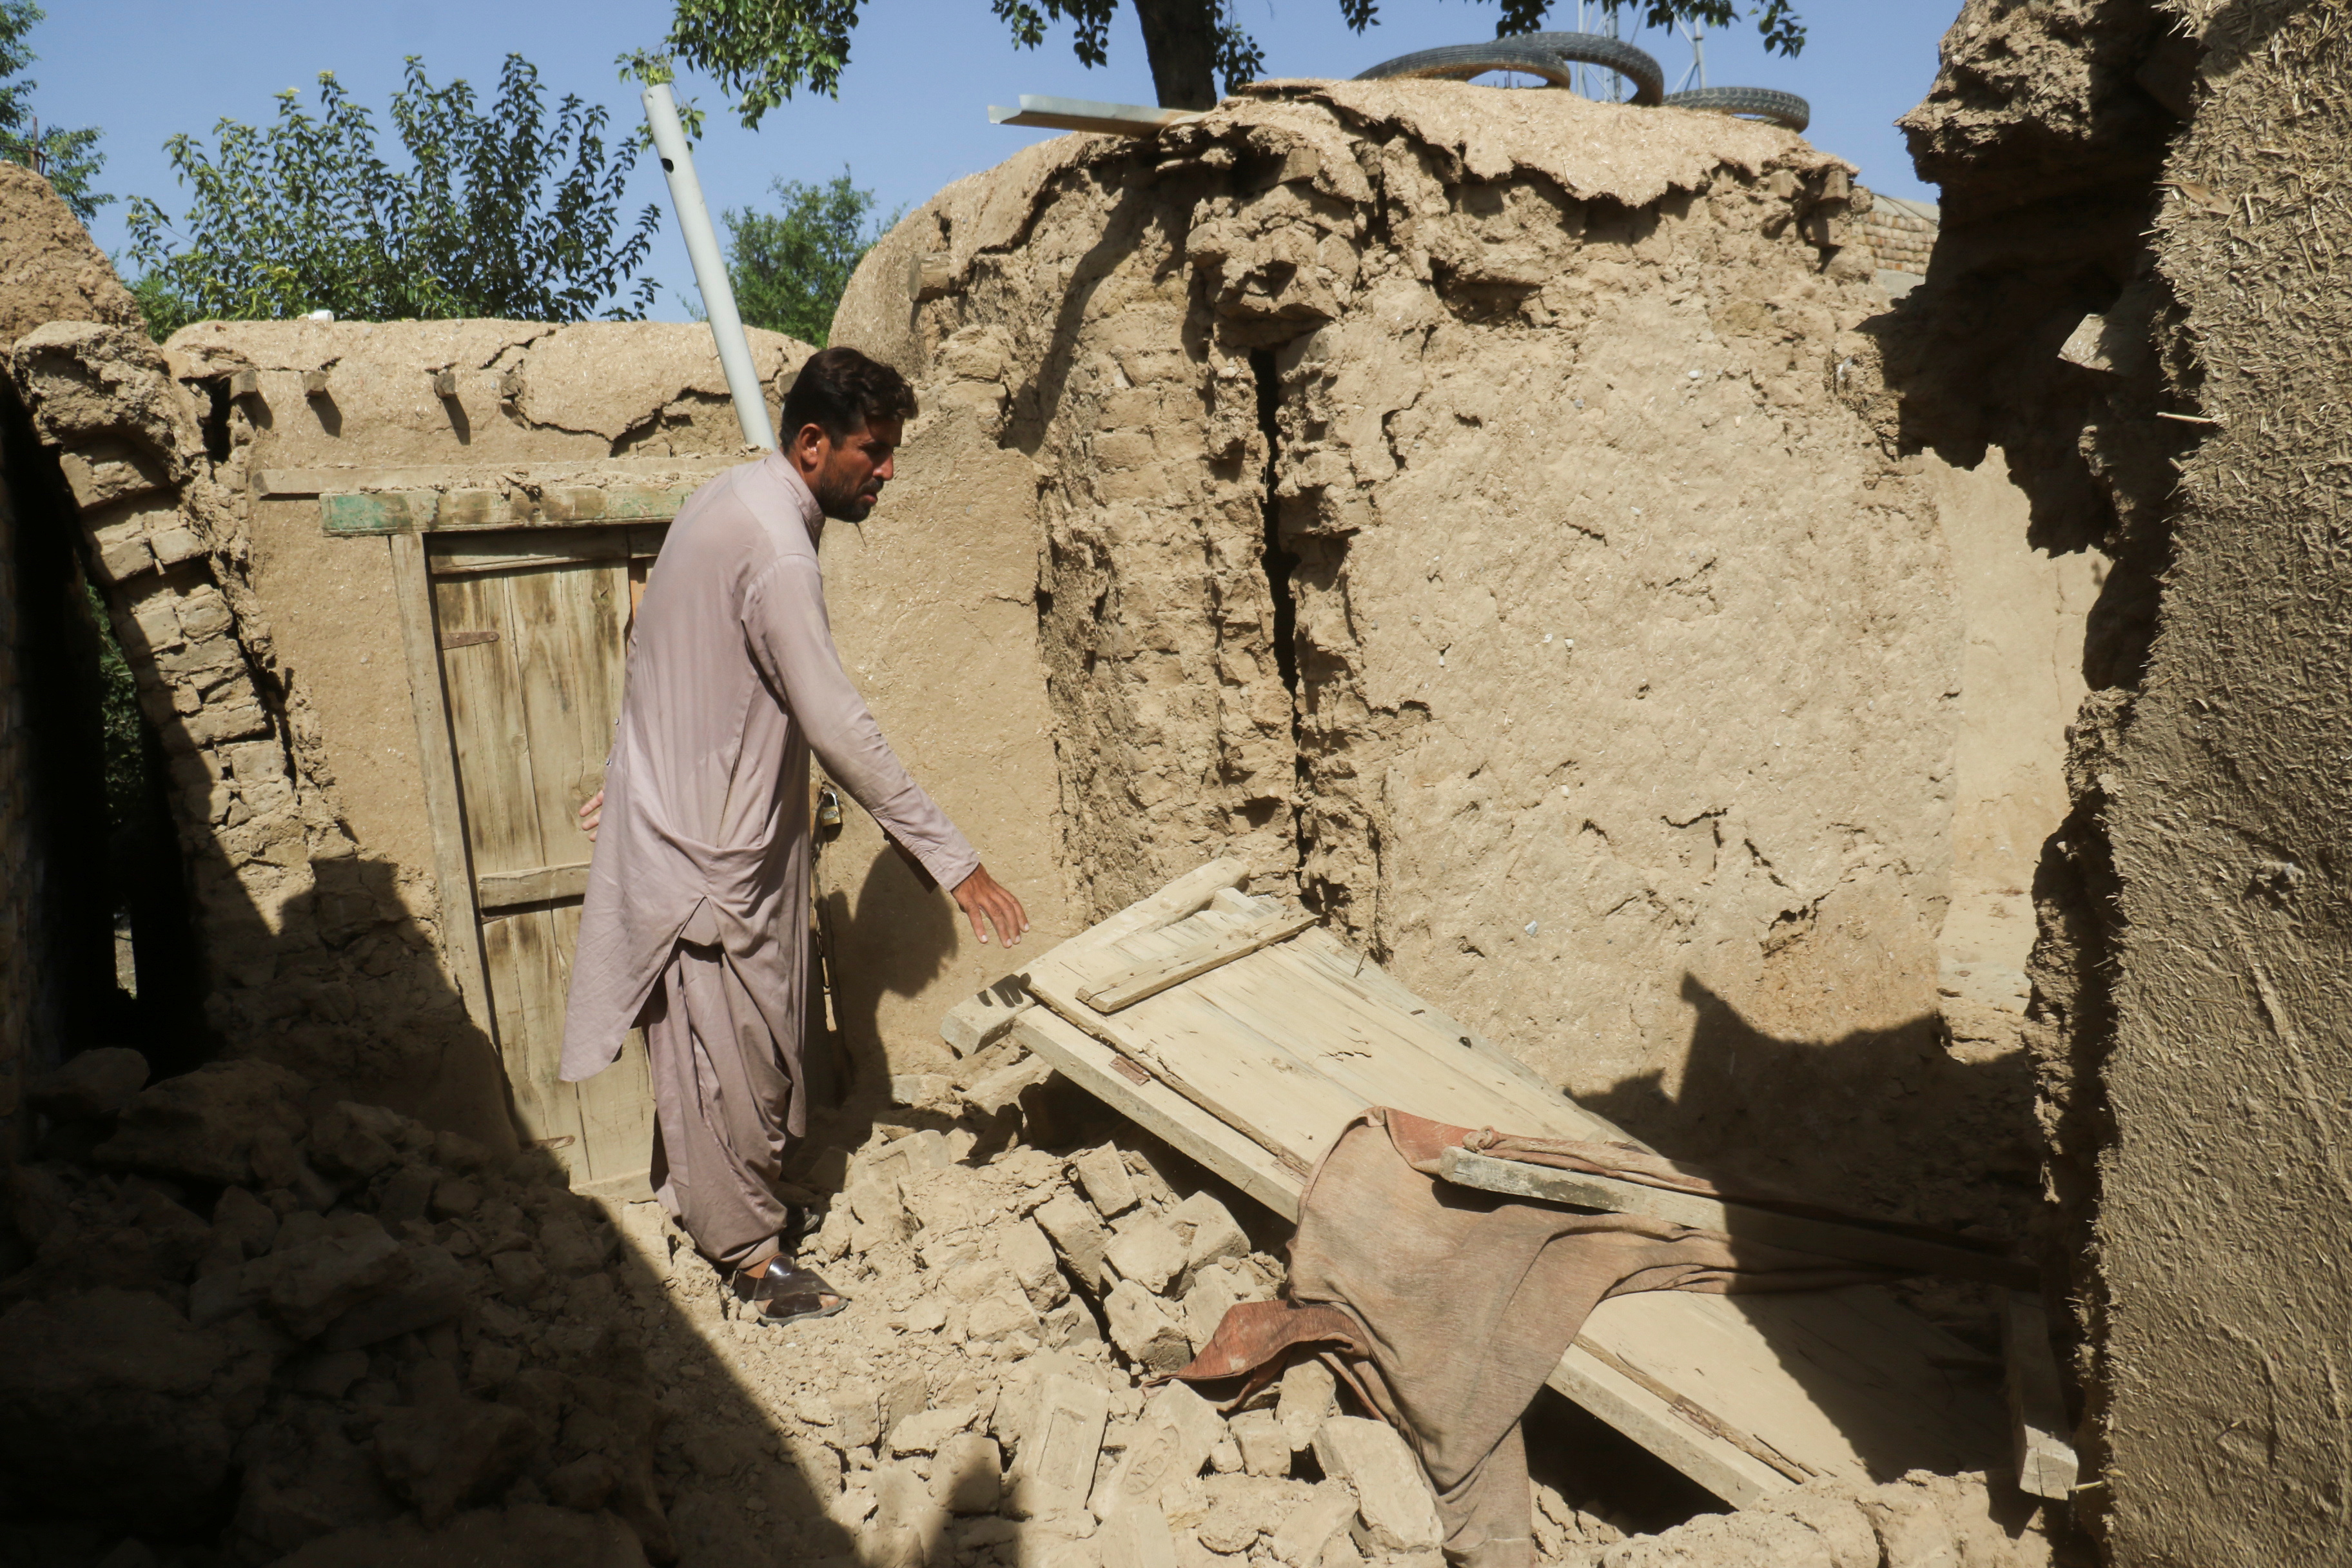 A resident removes damaged parts of his house following an earthquake in Harnai, Balochistan, Pakistan, October 7, 2021. REUTERS/Naseer Ahmed